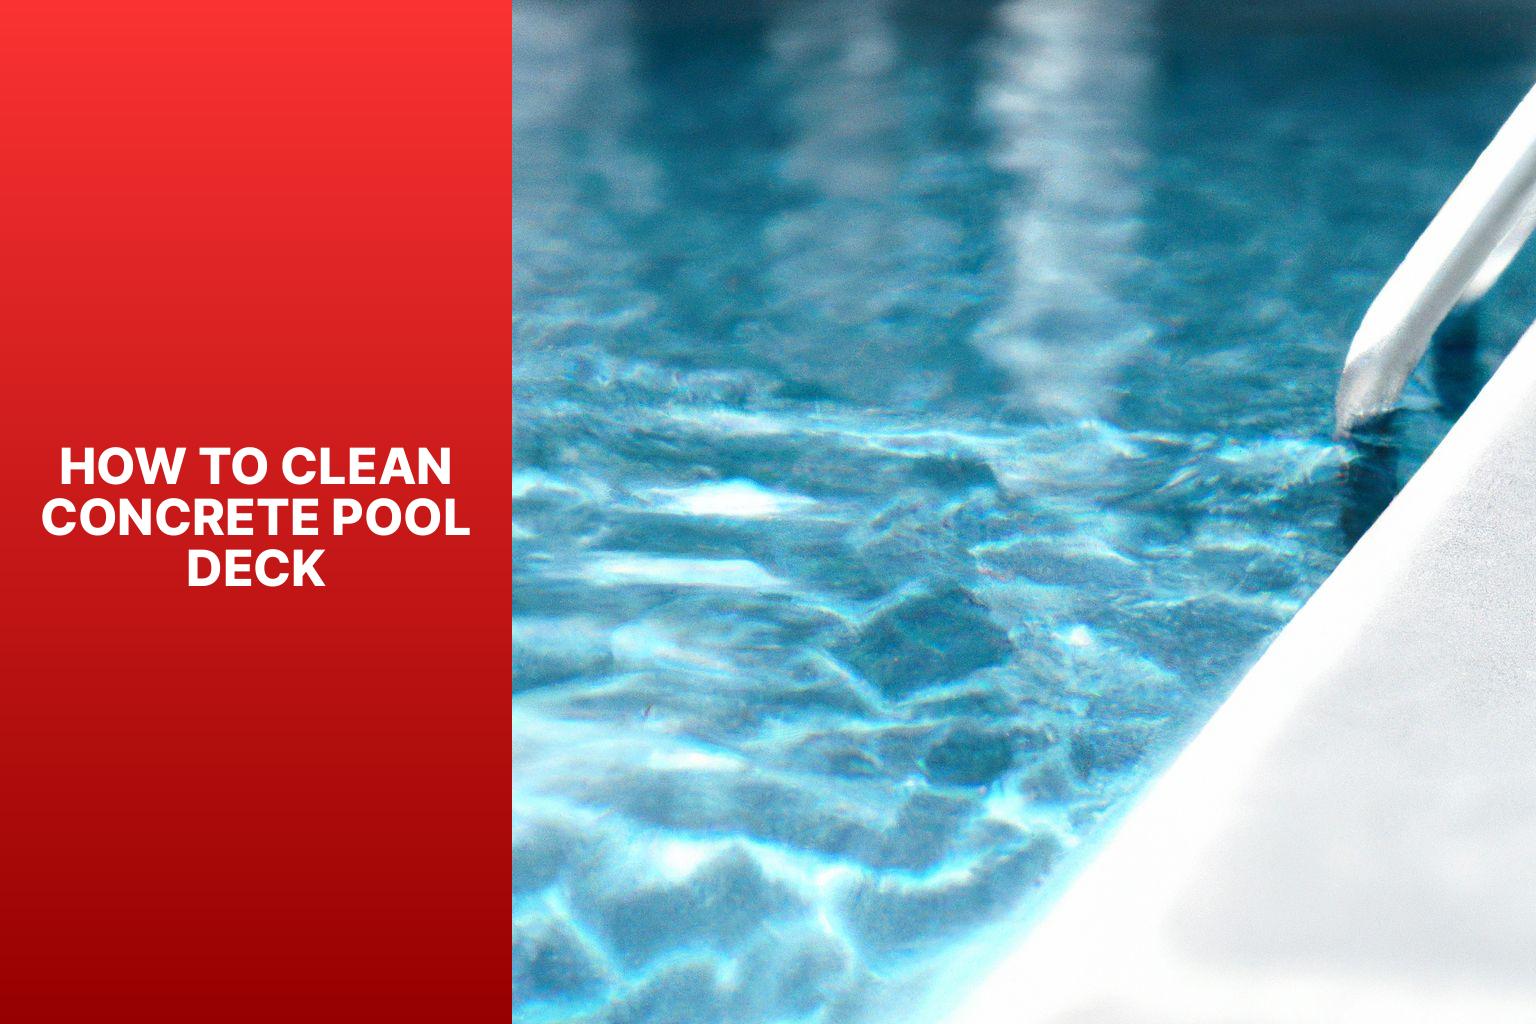 how to clean concrete pool deckhnn8 How to Clean Concrete Pool Deck?